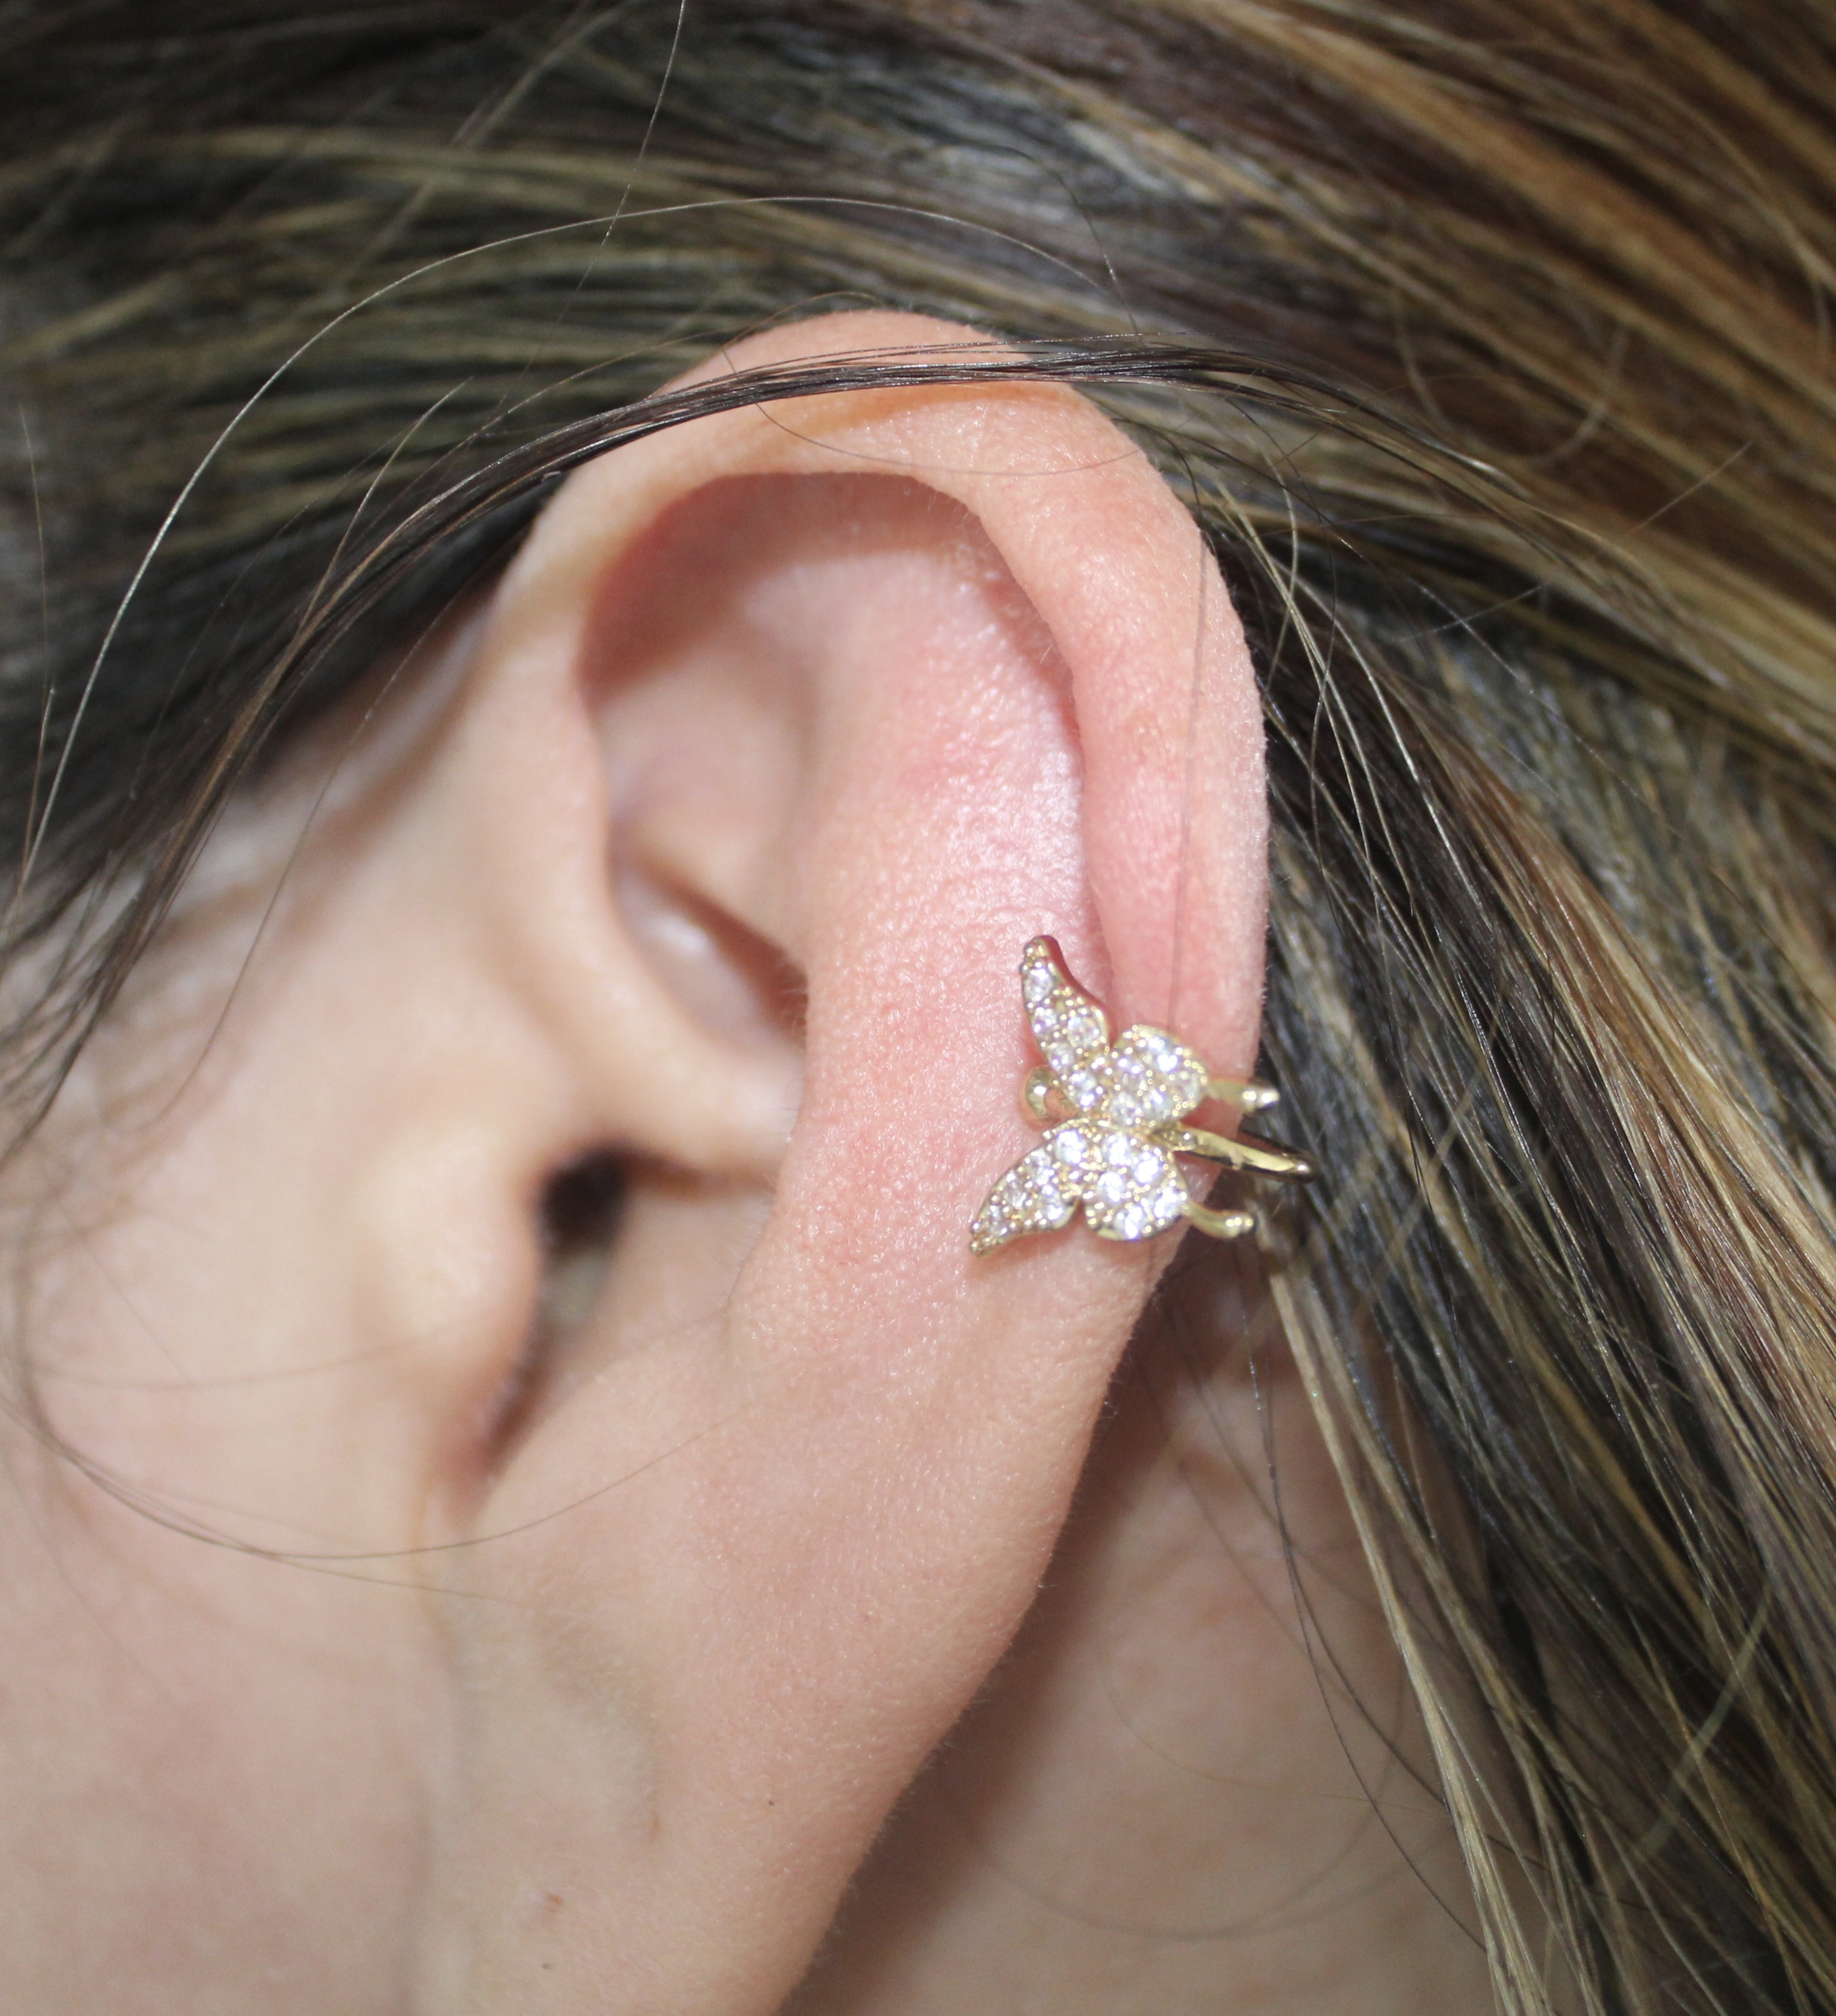 This Monarch Ear Cuffs is made with love by Geneva Treasures! Shop more unique gift ideas today with Spots Initiatives, the best way to support creators.